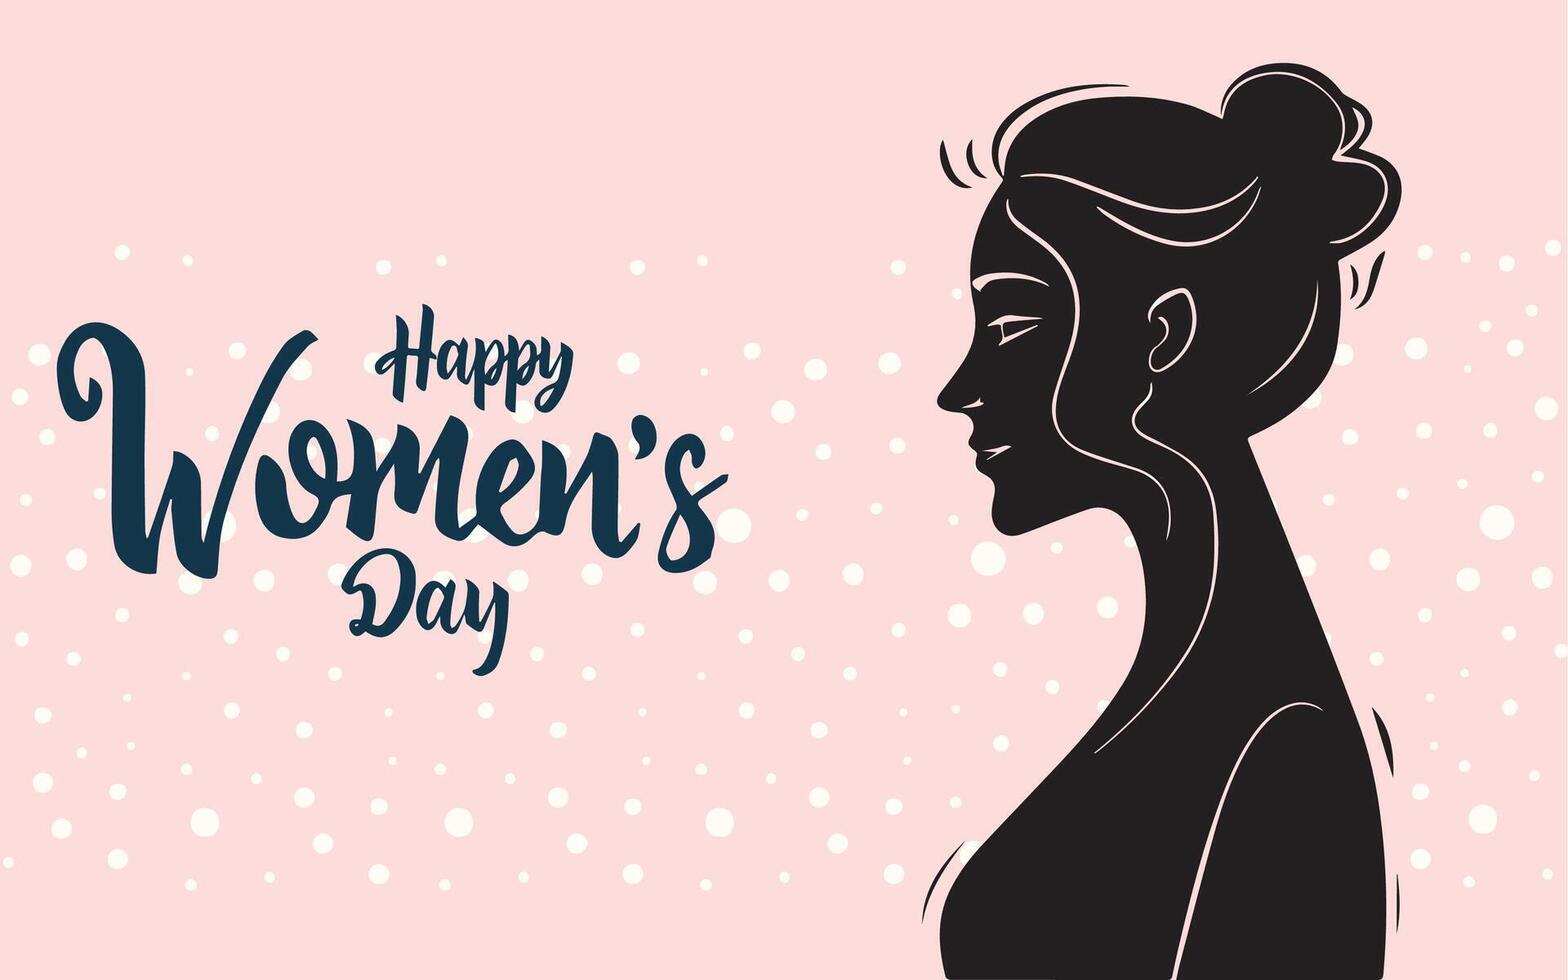 Happy women's day greeting calligraphy with women's silhouette vector